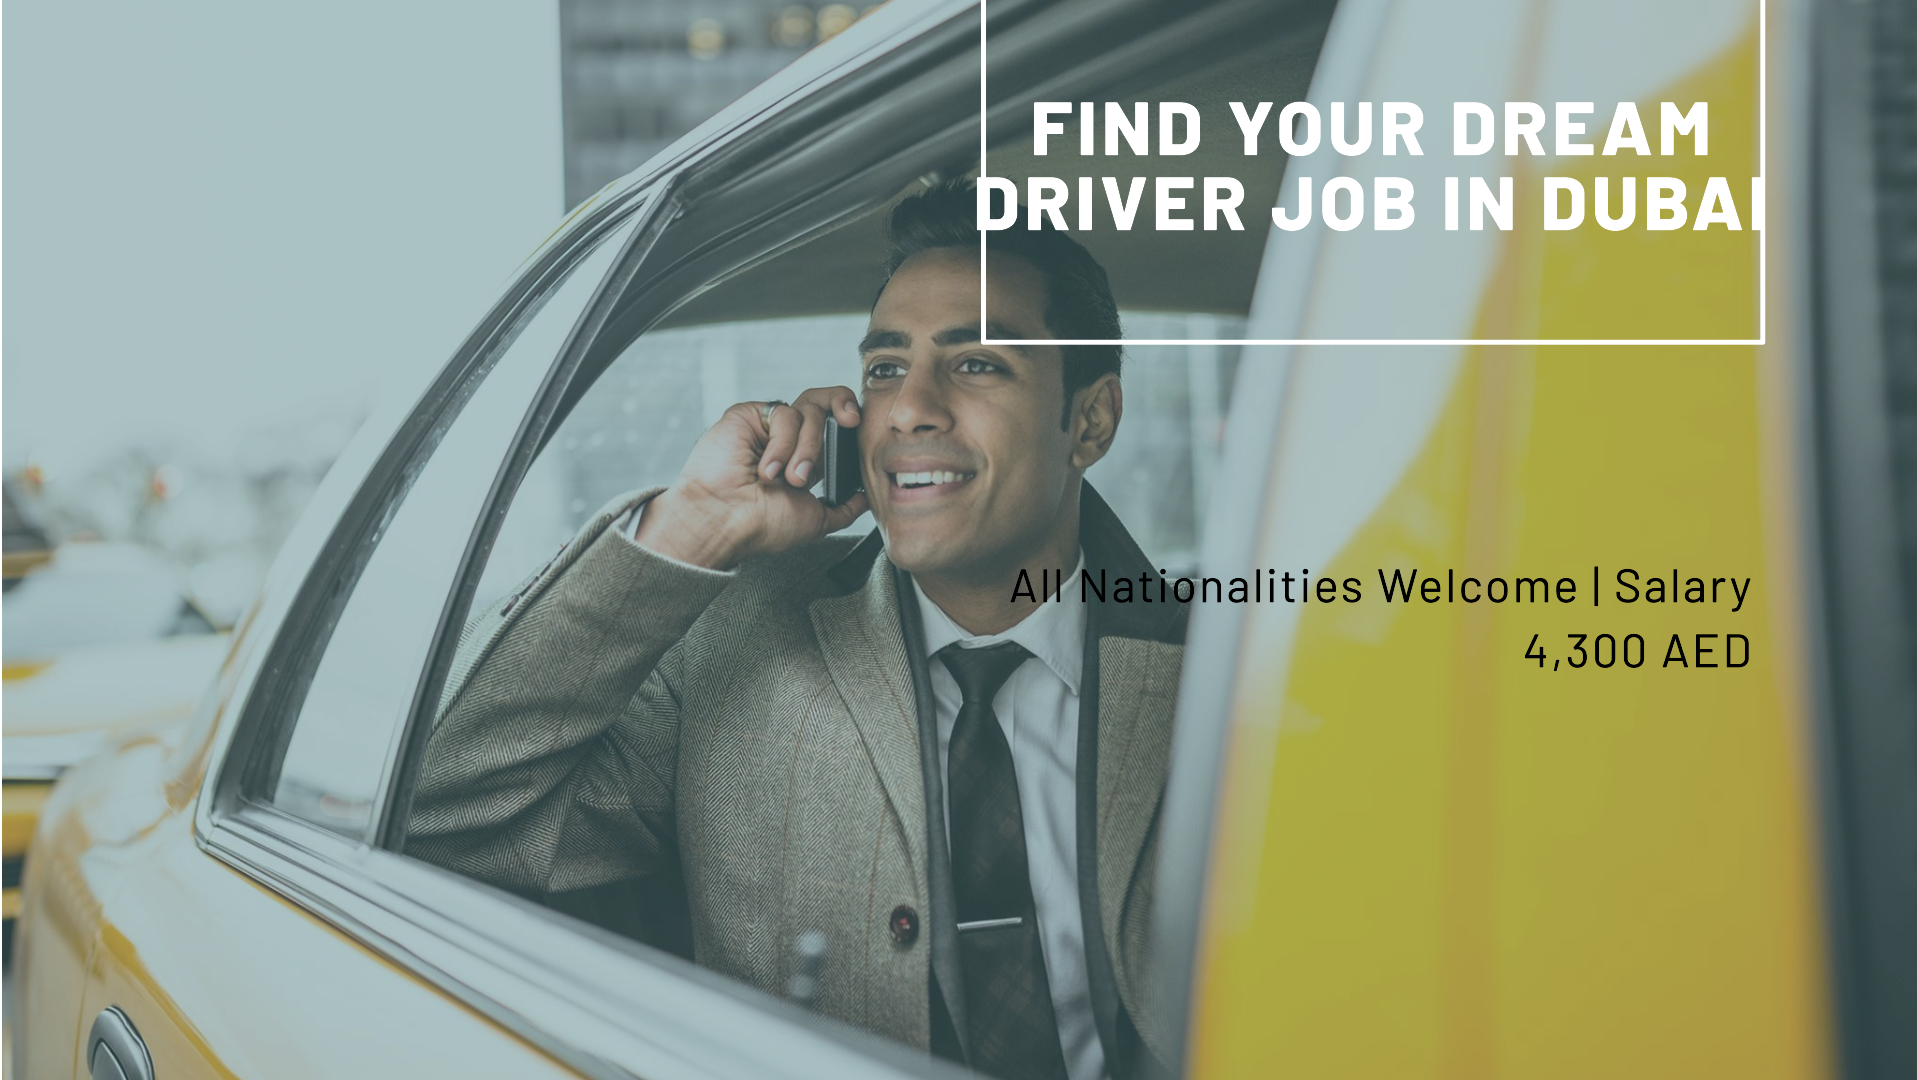 drivers job in dubai for all nationalities with salary 4,300 AED